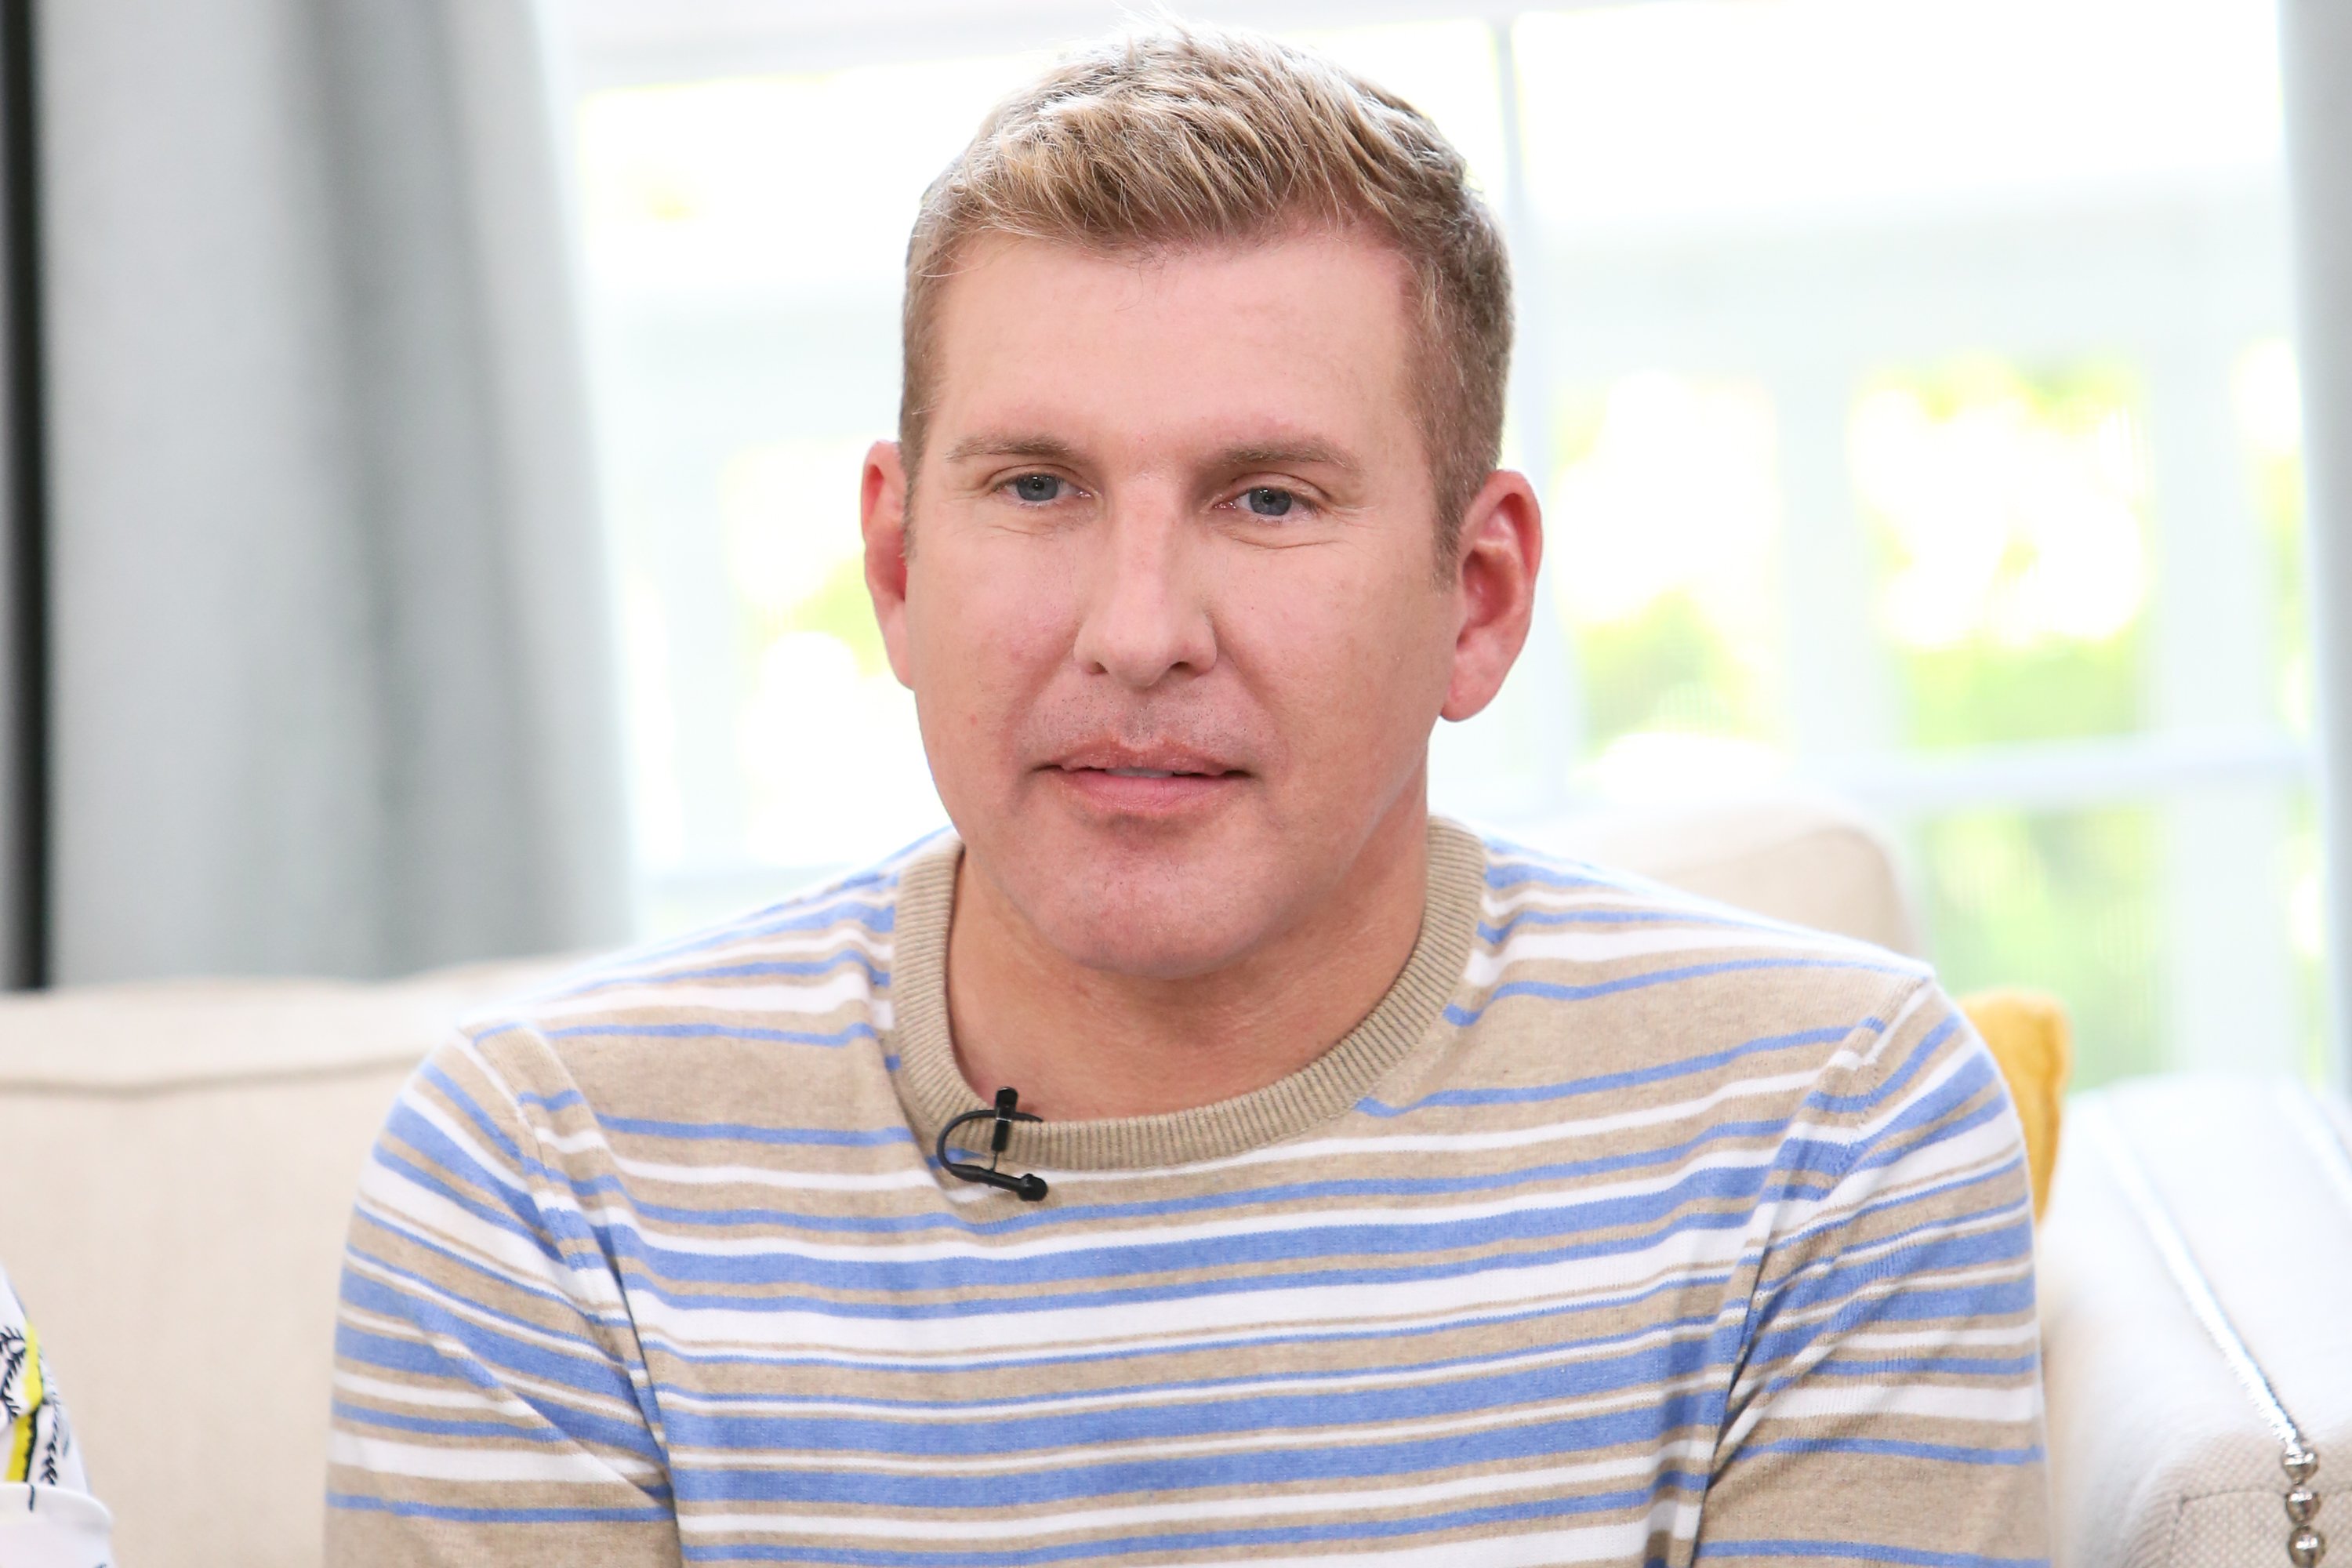 Todd Chrisley visit Hallmark's "Home & Family" at Universal Studios Hollywood on June 18, 2018 | Photo: GettyImages